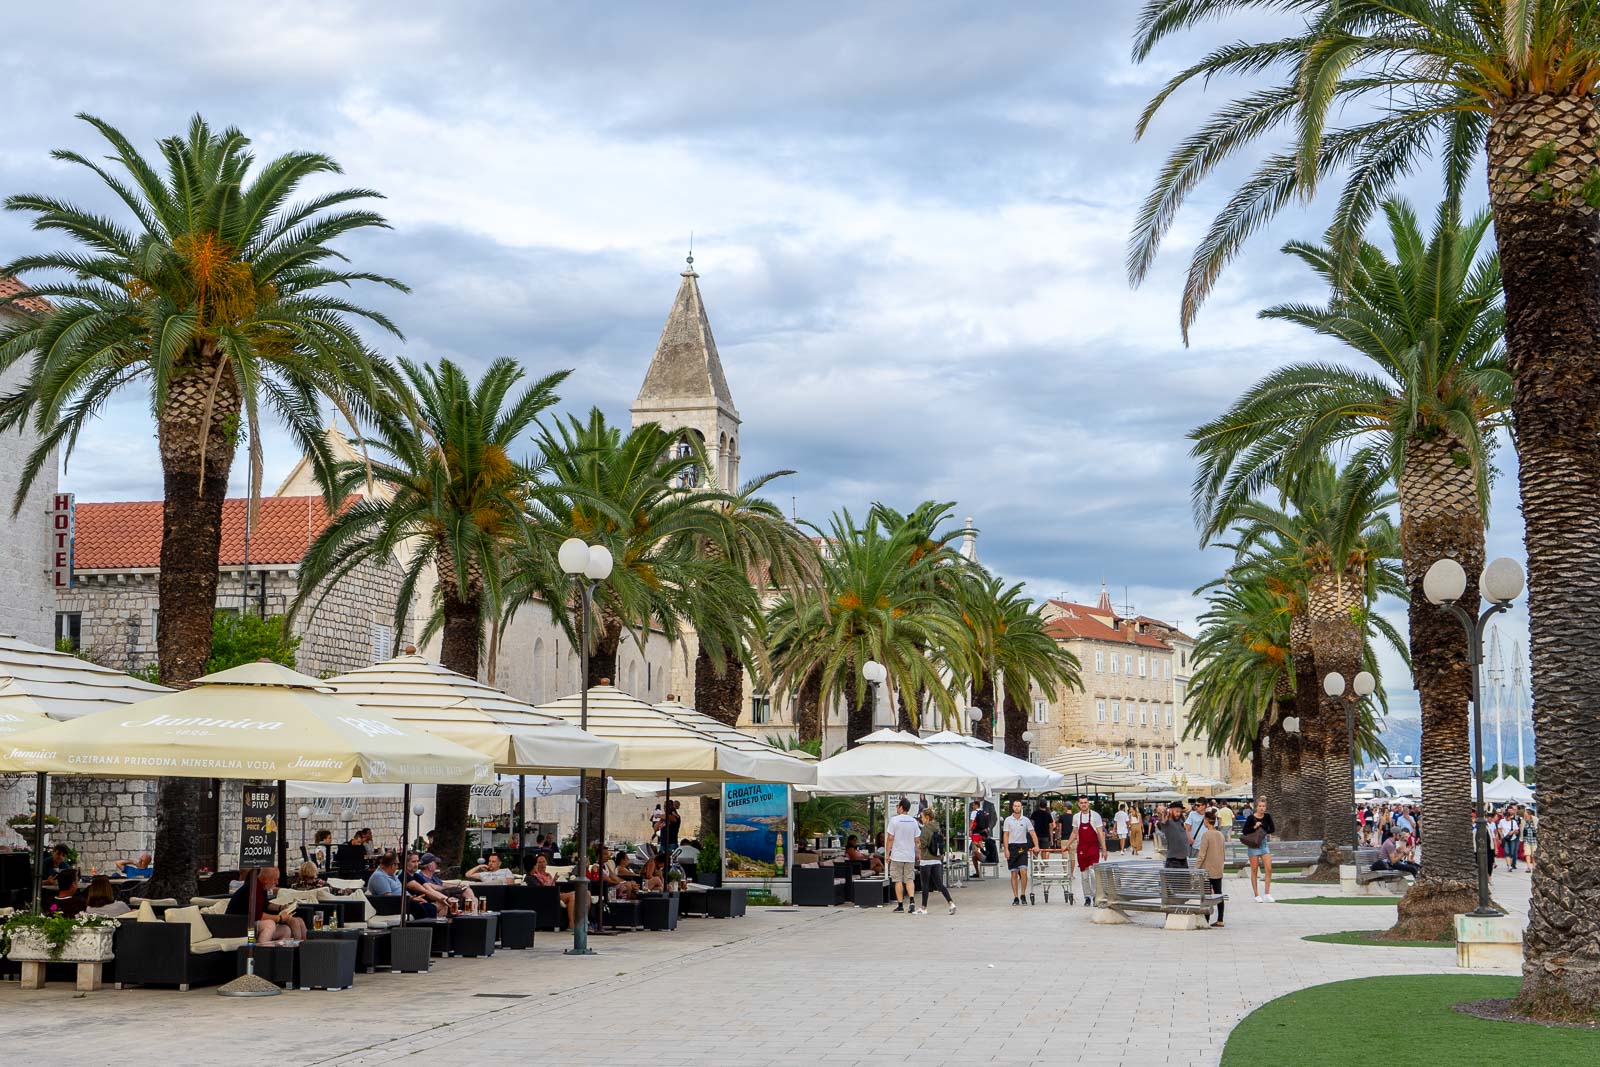 The waterfront of Trogir